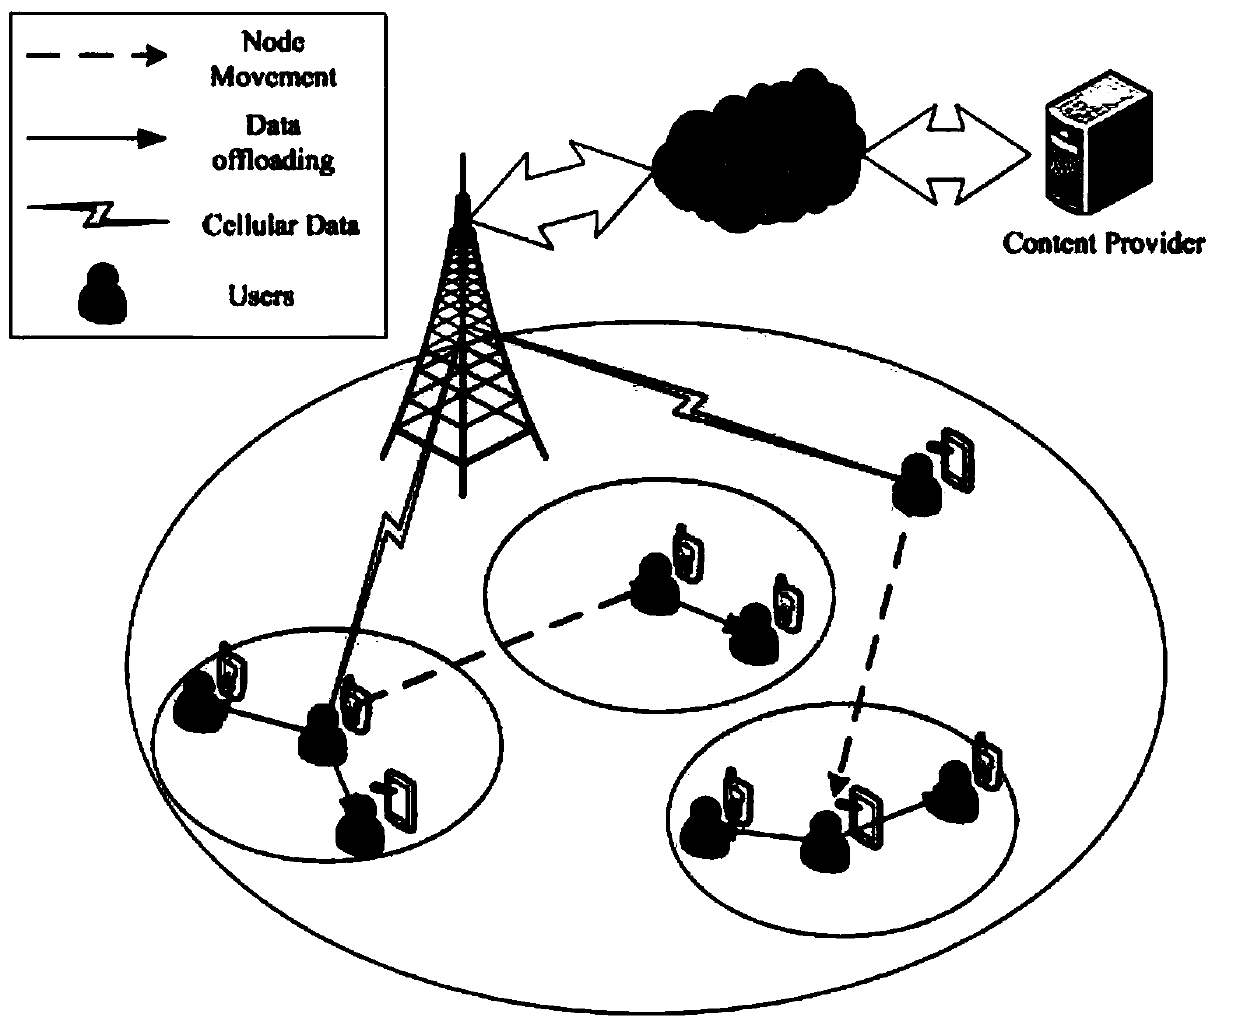 Seed node selection method for offloading cellular traffic through opportunistic mobile network